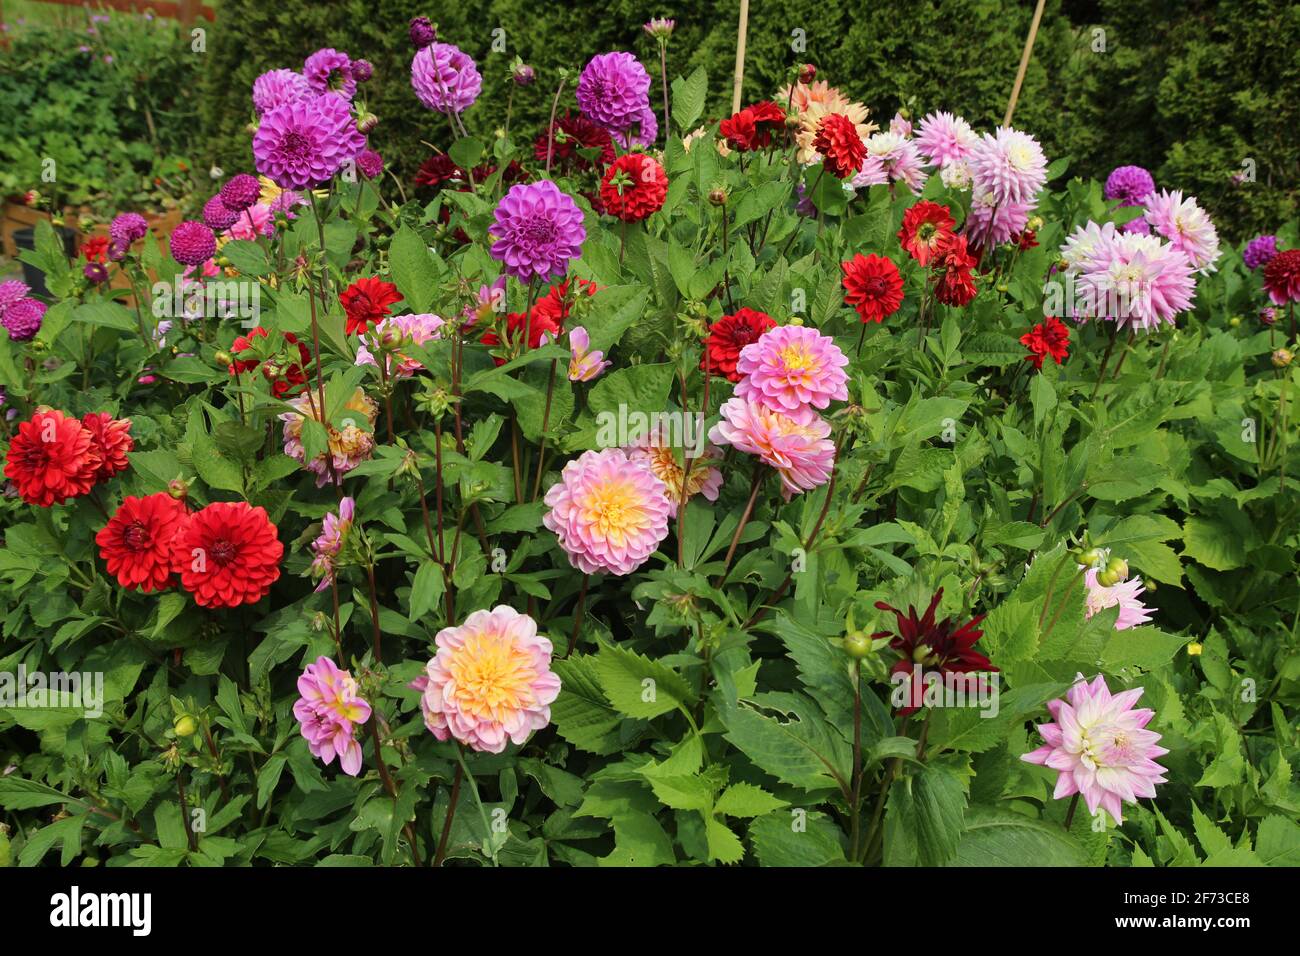 Pink, purple and red Dahlia flowers growing amidst greenery from vegetable bed in garden during summertime Stock Photo